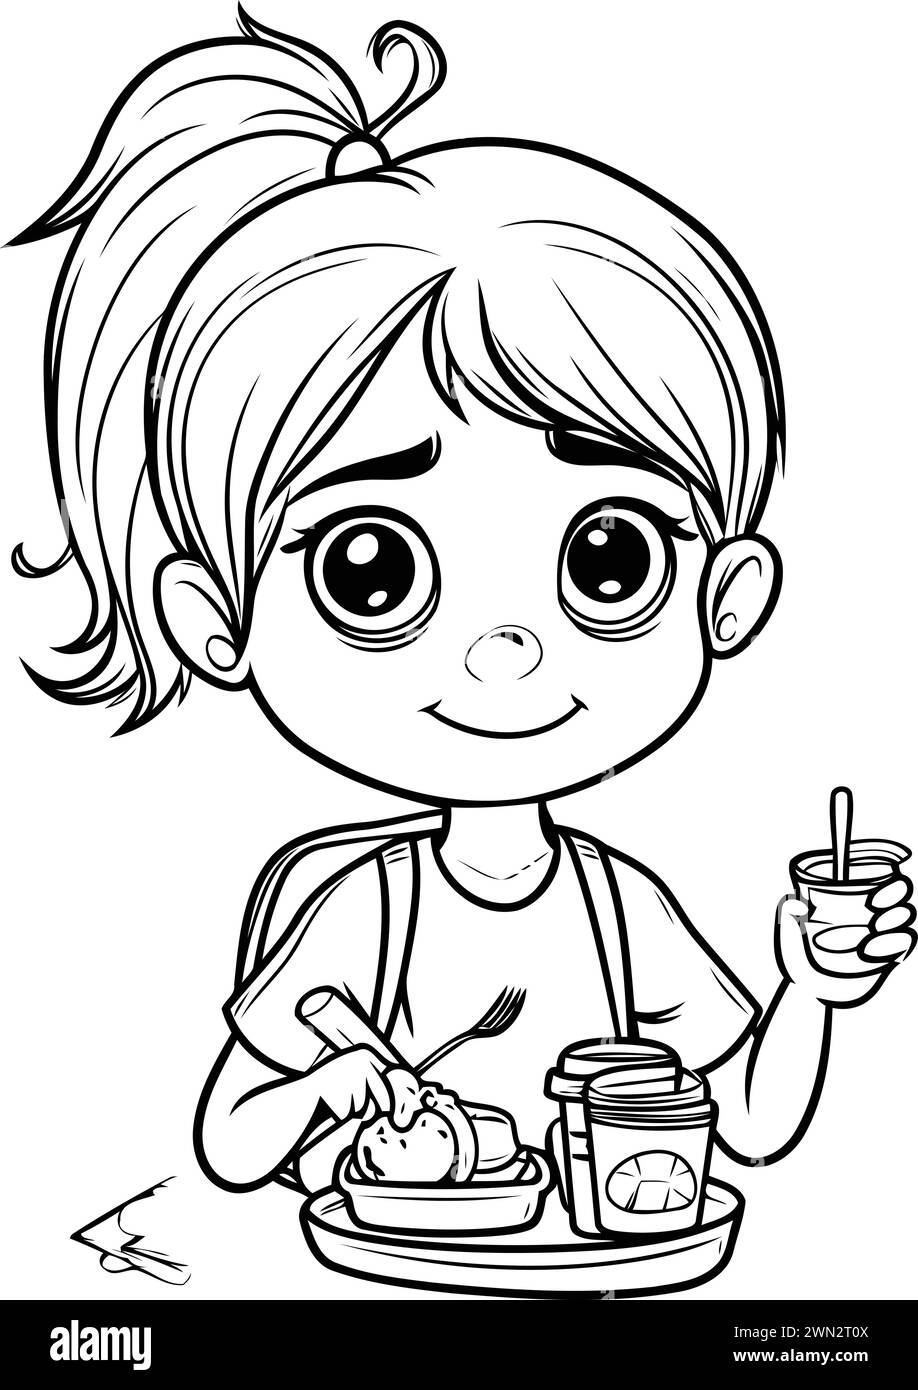 Cute little girl eating fried chicken. Vector illustration for coloring book Stock Vector